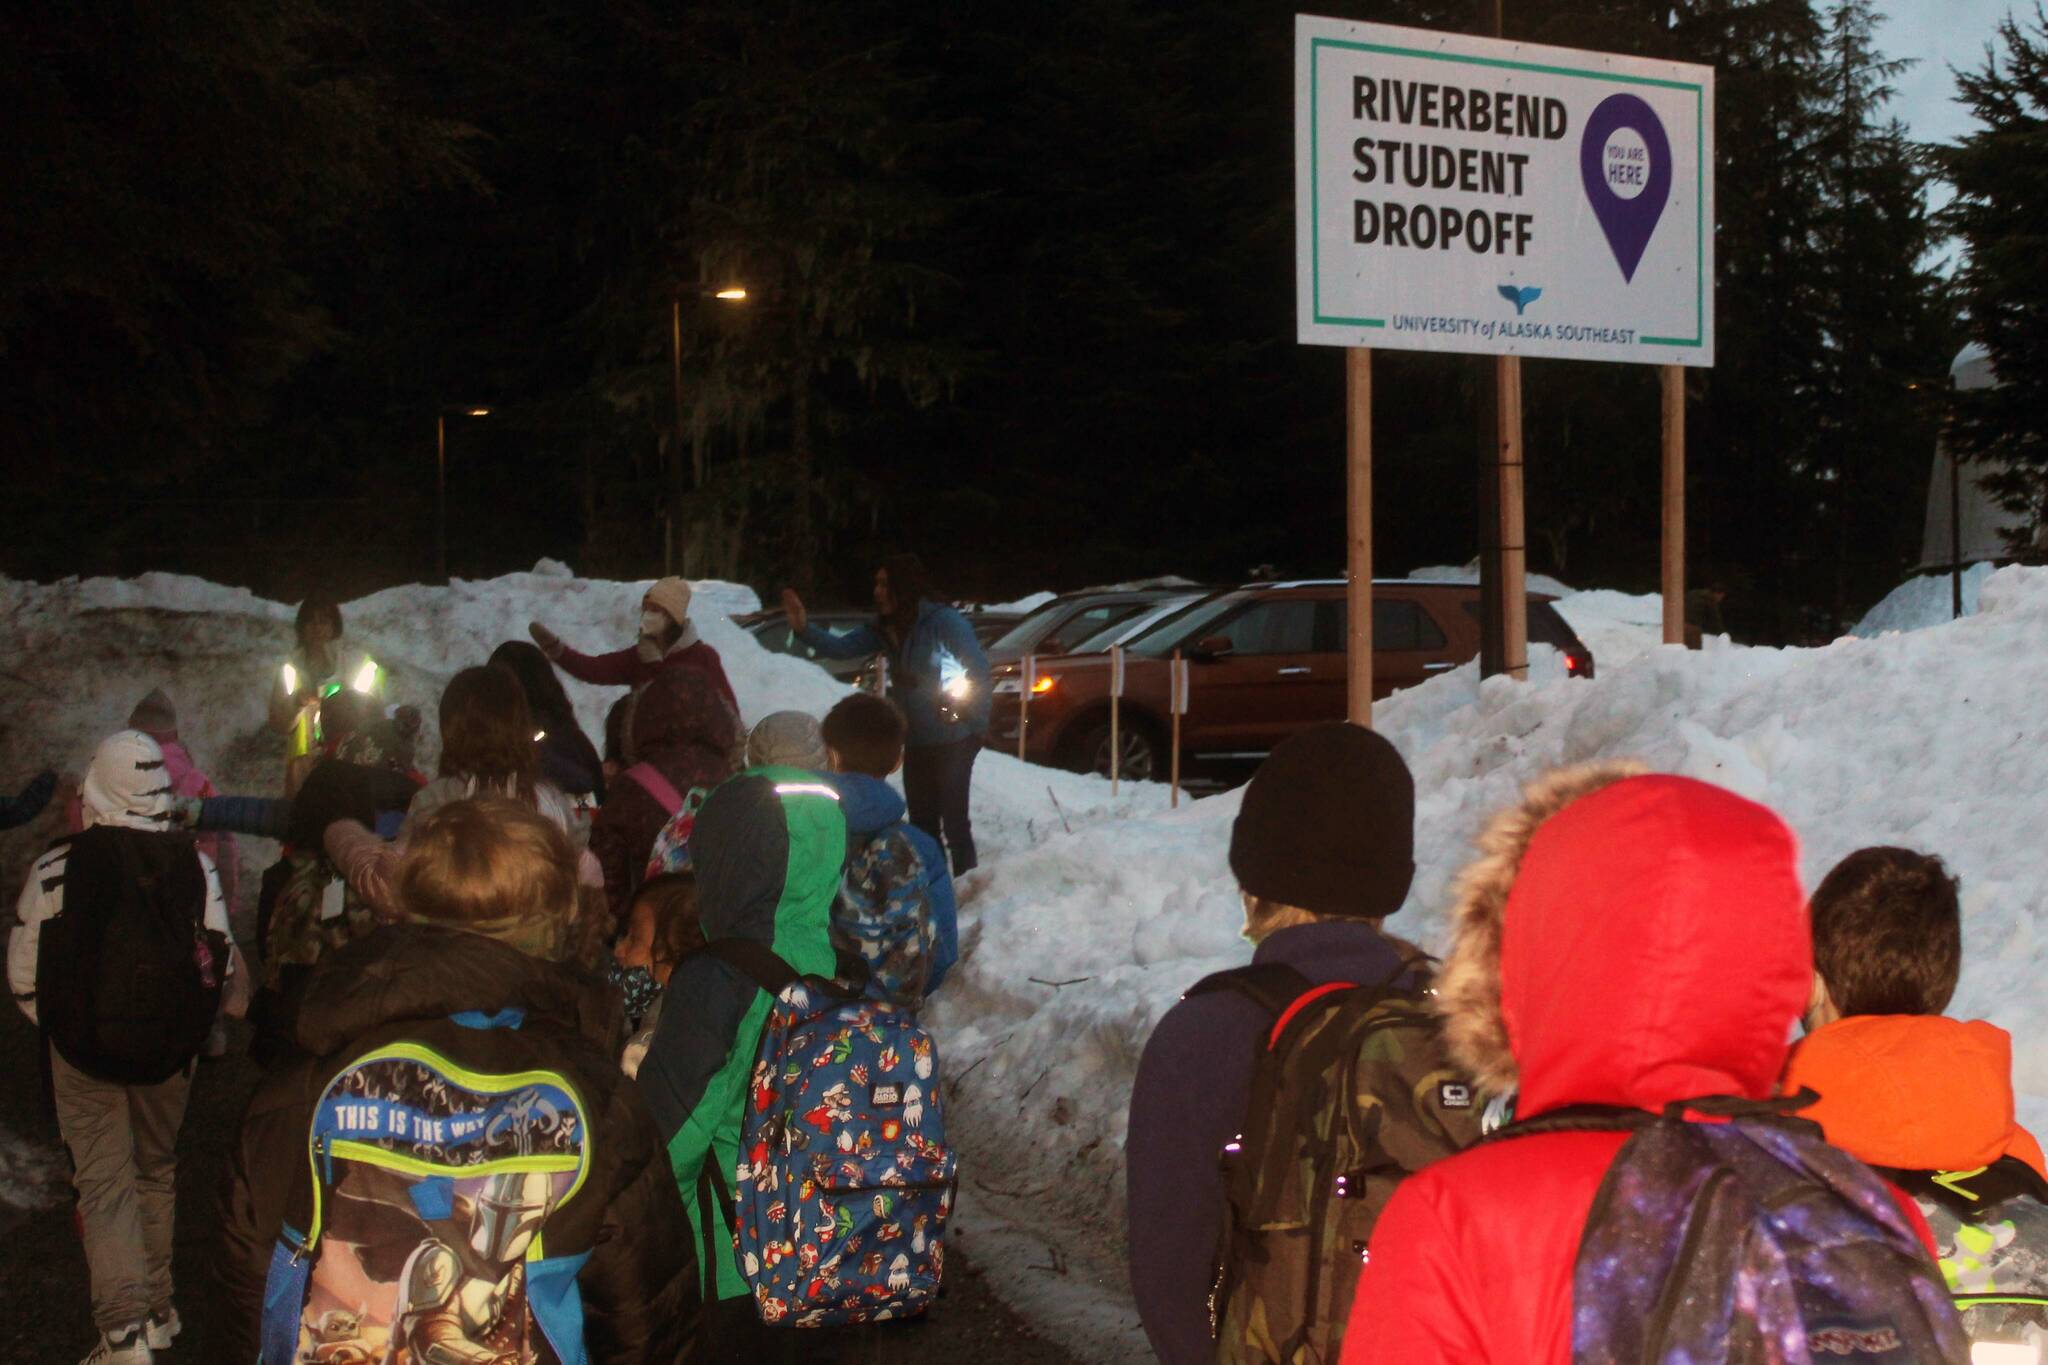 Students from Riverbend Elementary School arrive for their first day of classes at Chapel By the Lake on Jan. 24. The church offered its education wing to the Juneau School District after a burst pipe shuttered the Riverbend school building. (Dana Zigmund/Juneau Empire)